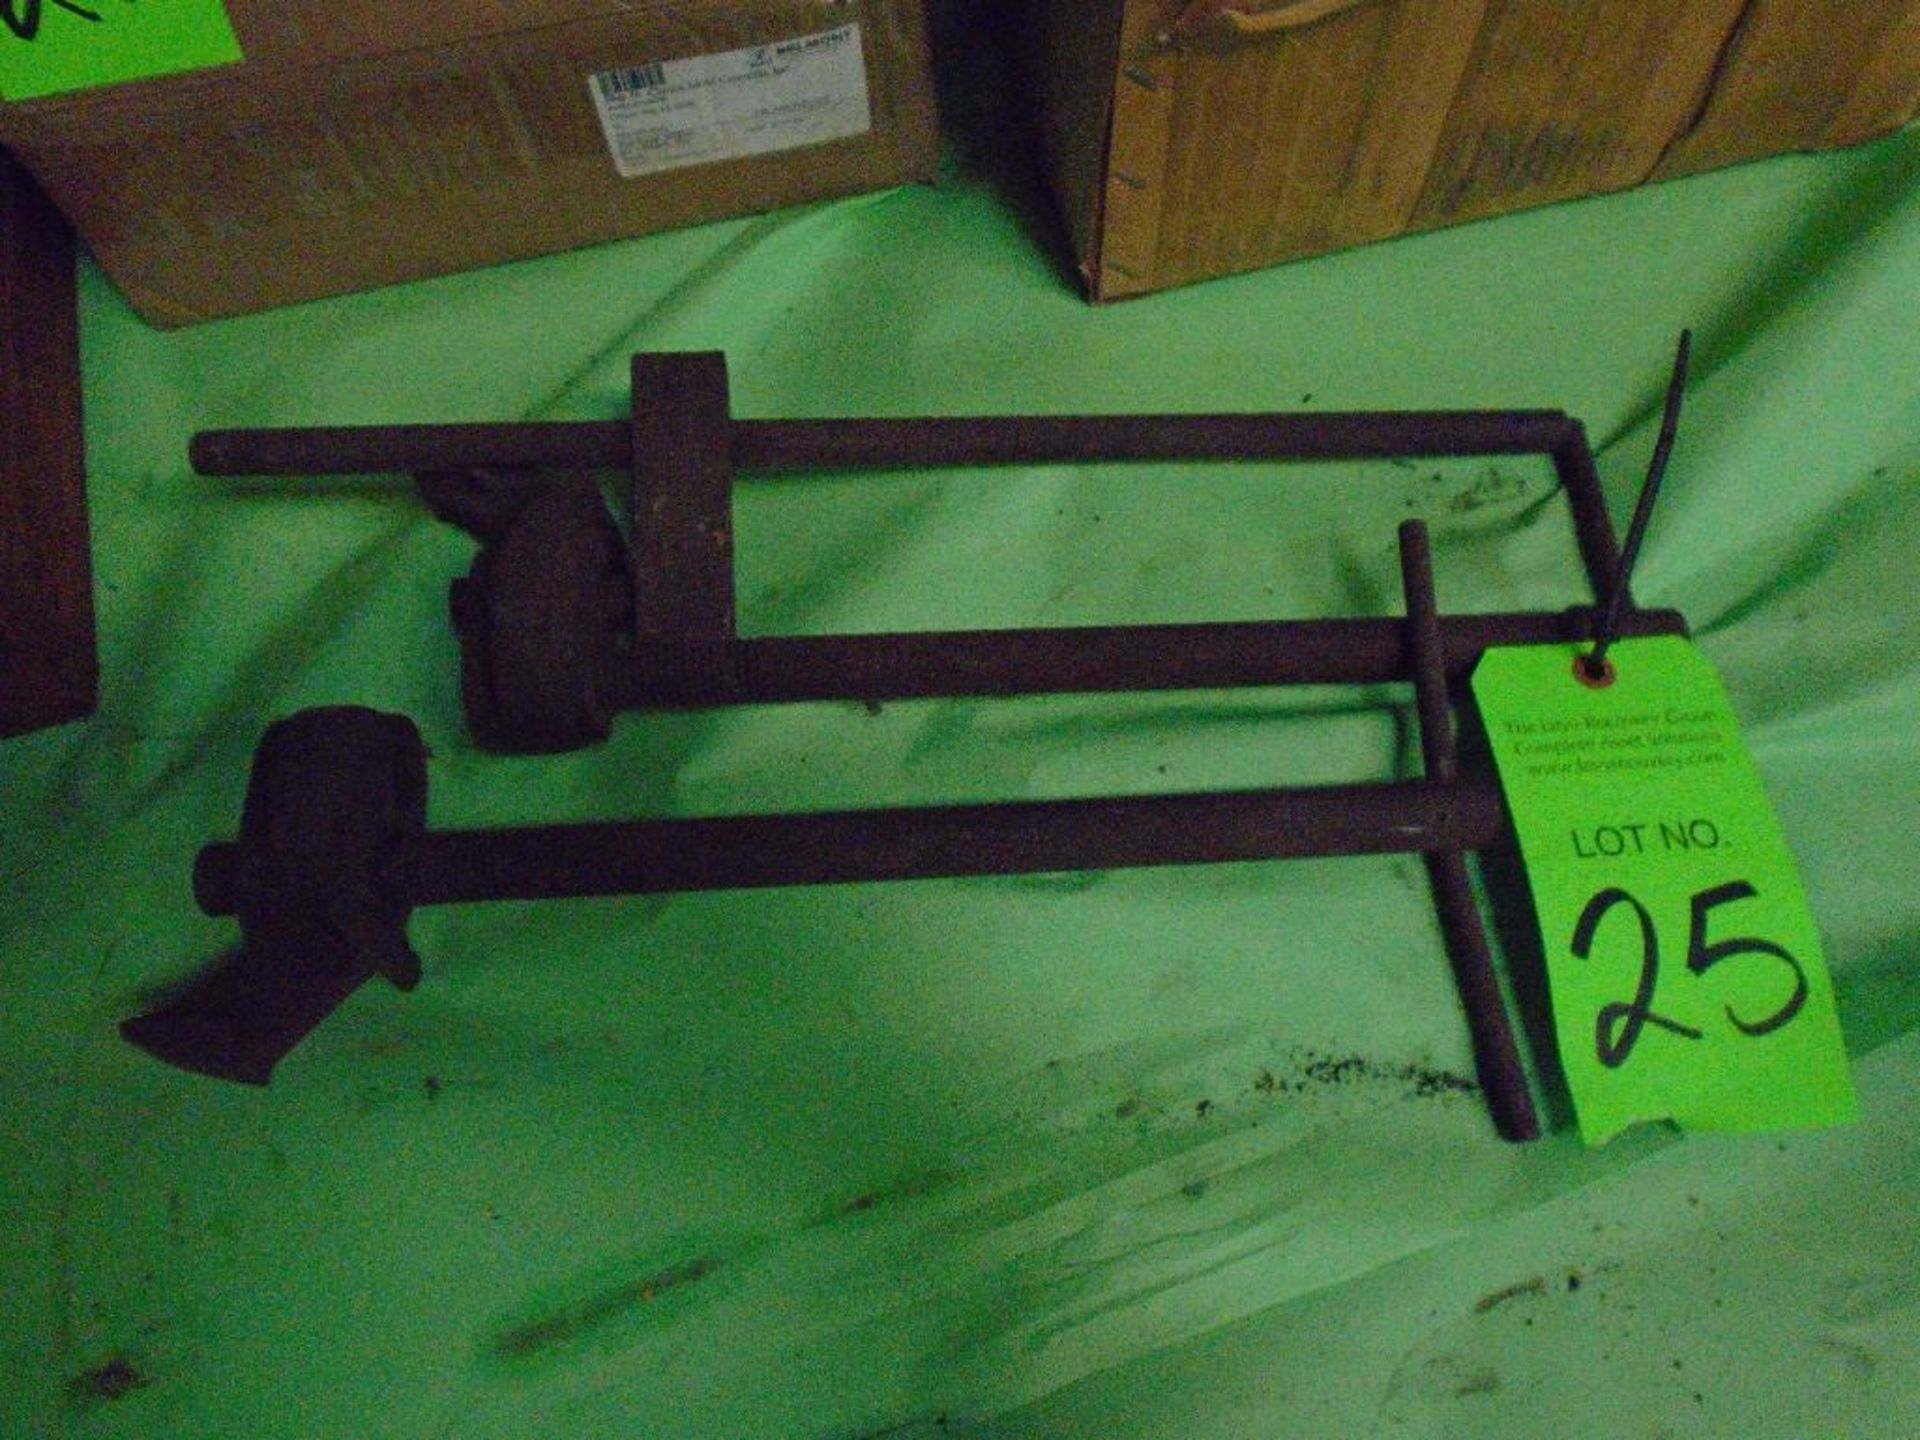 Lot of 2 Clamps